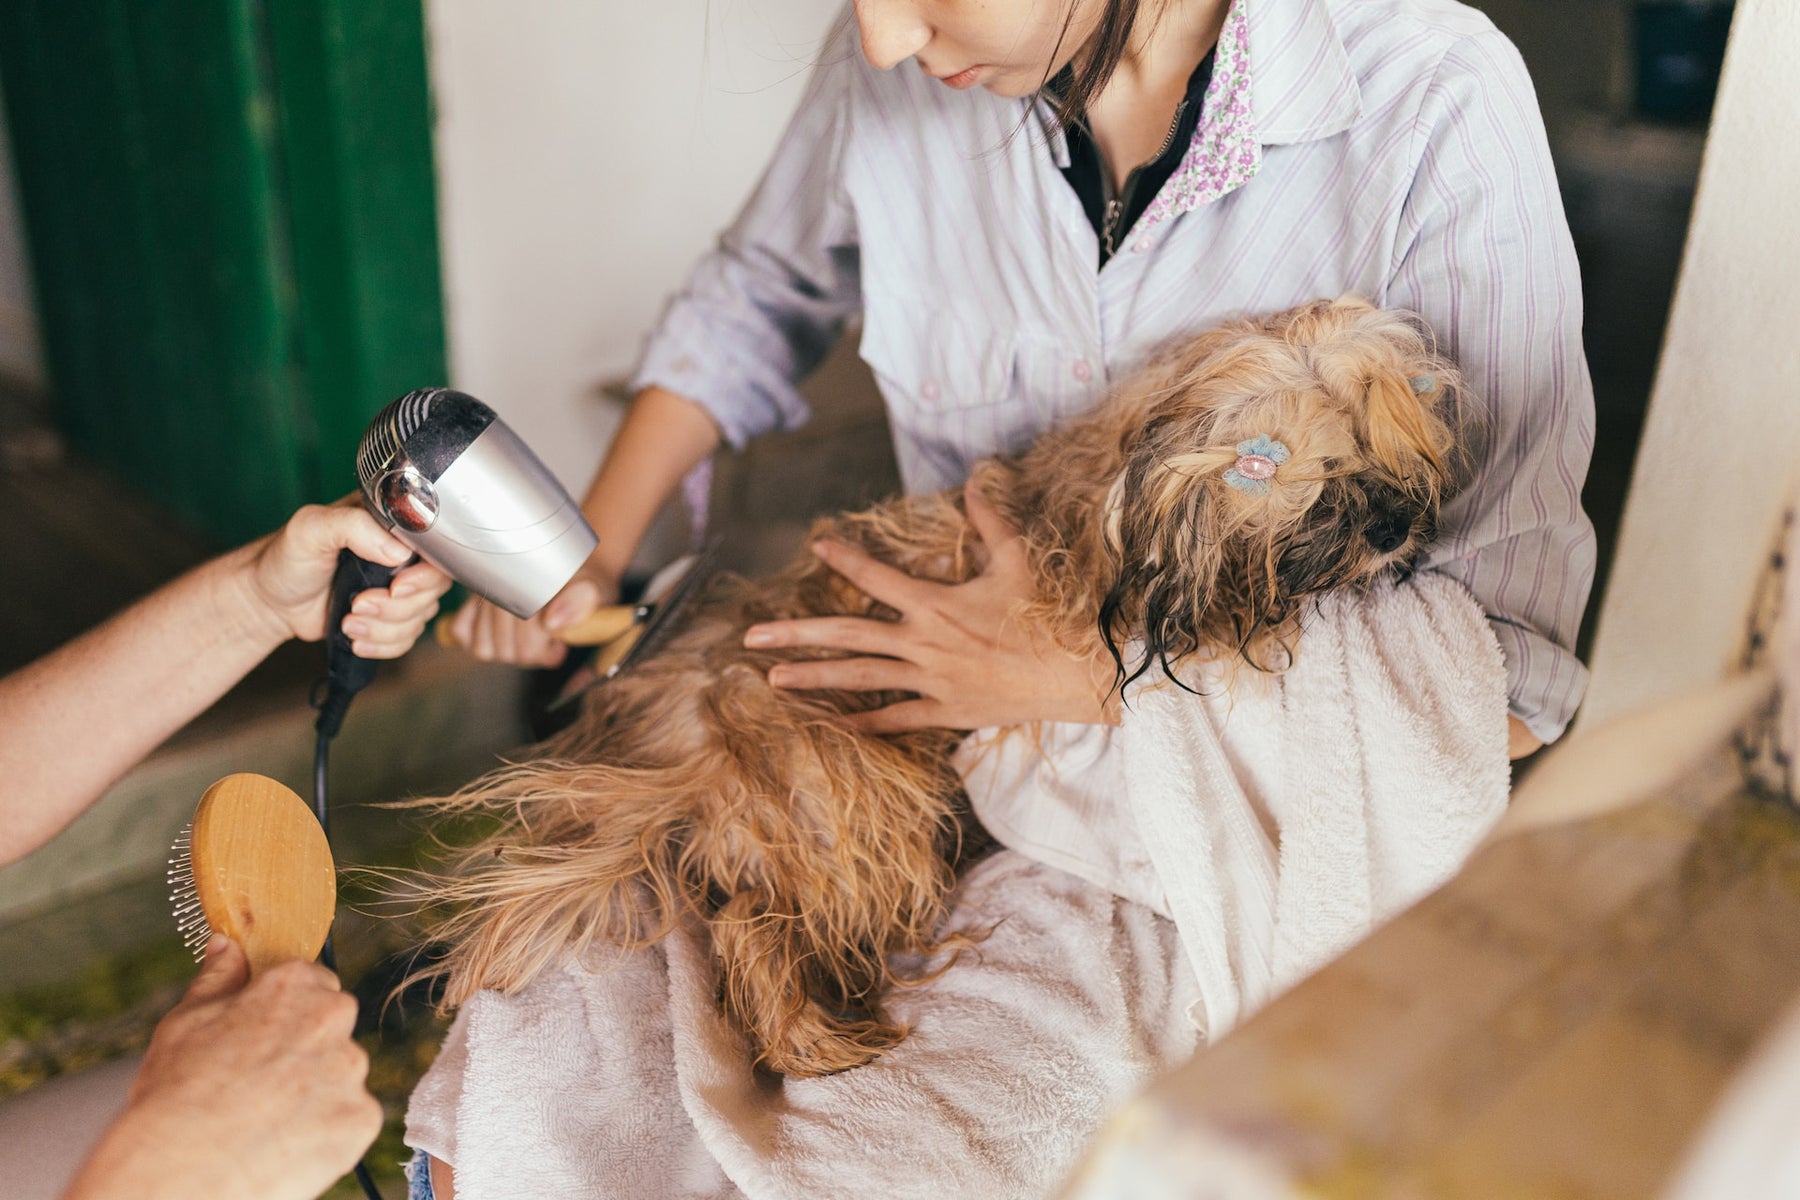 Blow Drying A Dog With A Human Hair Blow Dryer